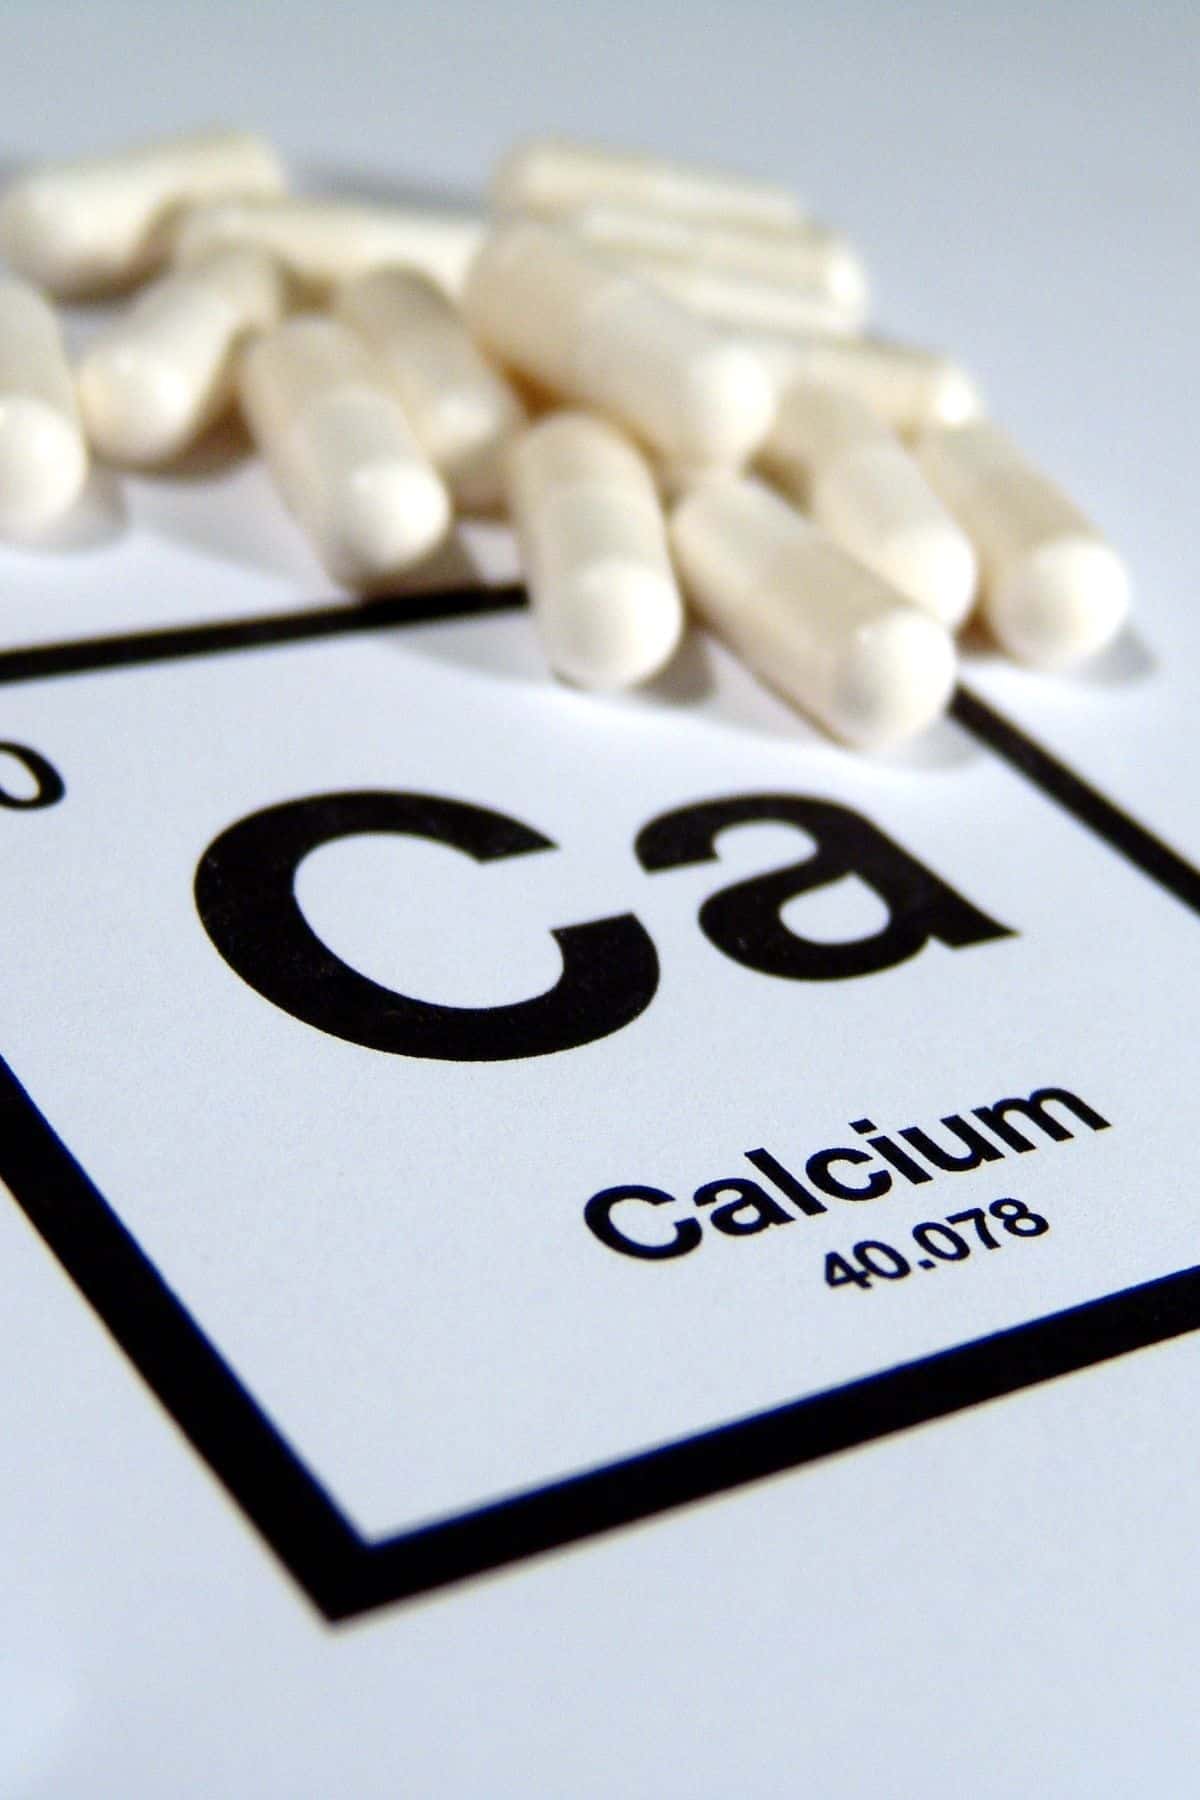 calcium supplements on top of a piece of the periodic table.